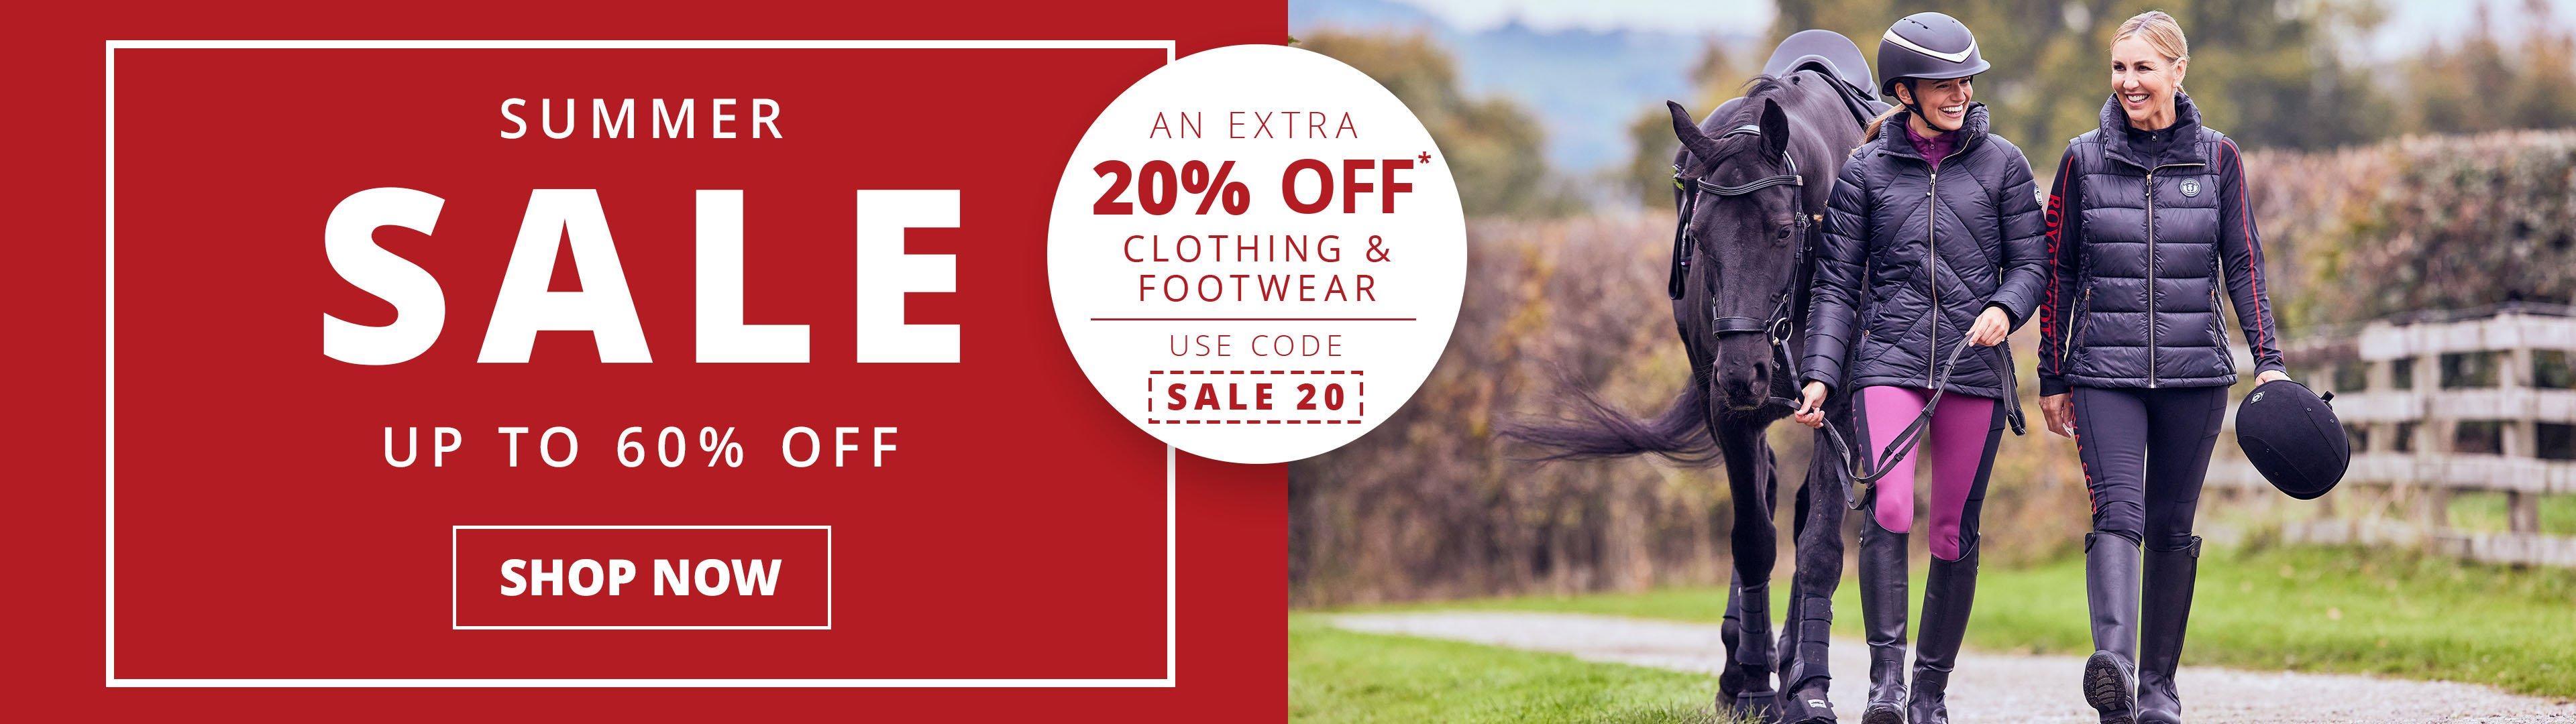 Summer Sale - Up To 60% Off + Extra 20% Off Clothing And Footwear> SHOP ALL SALE